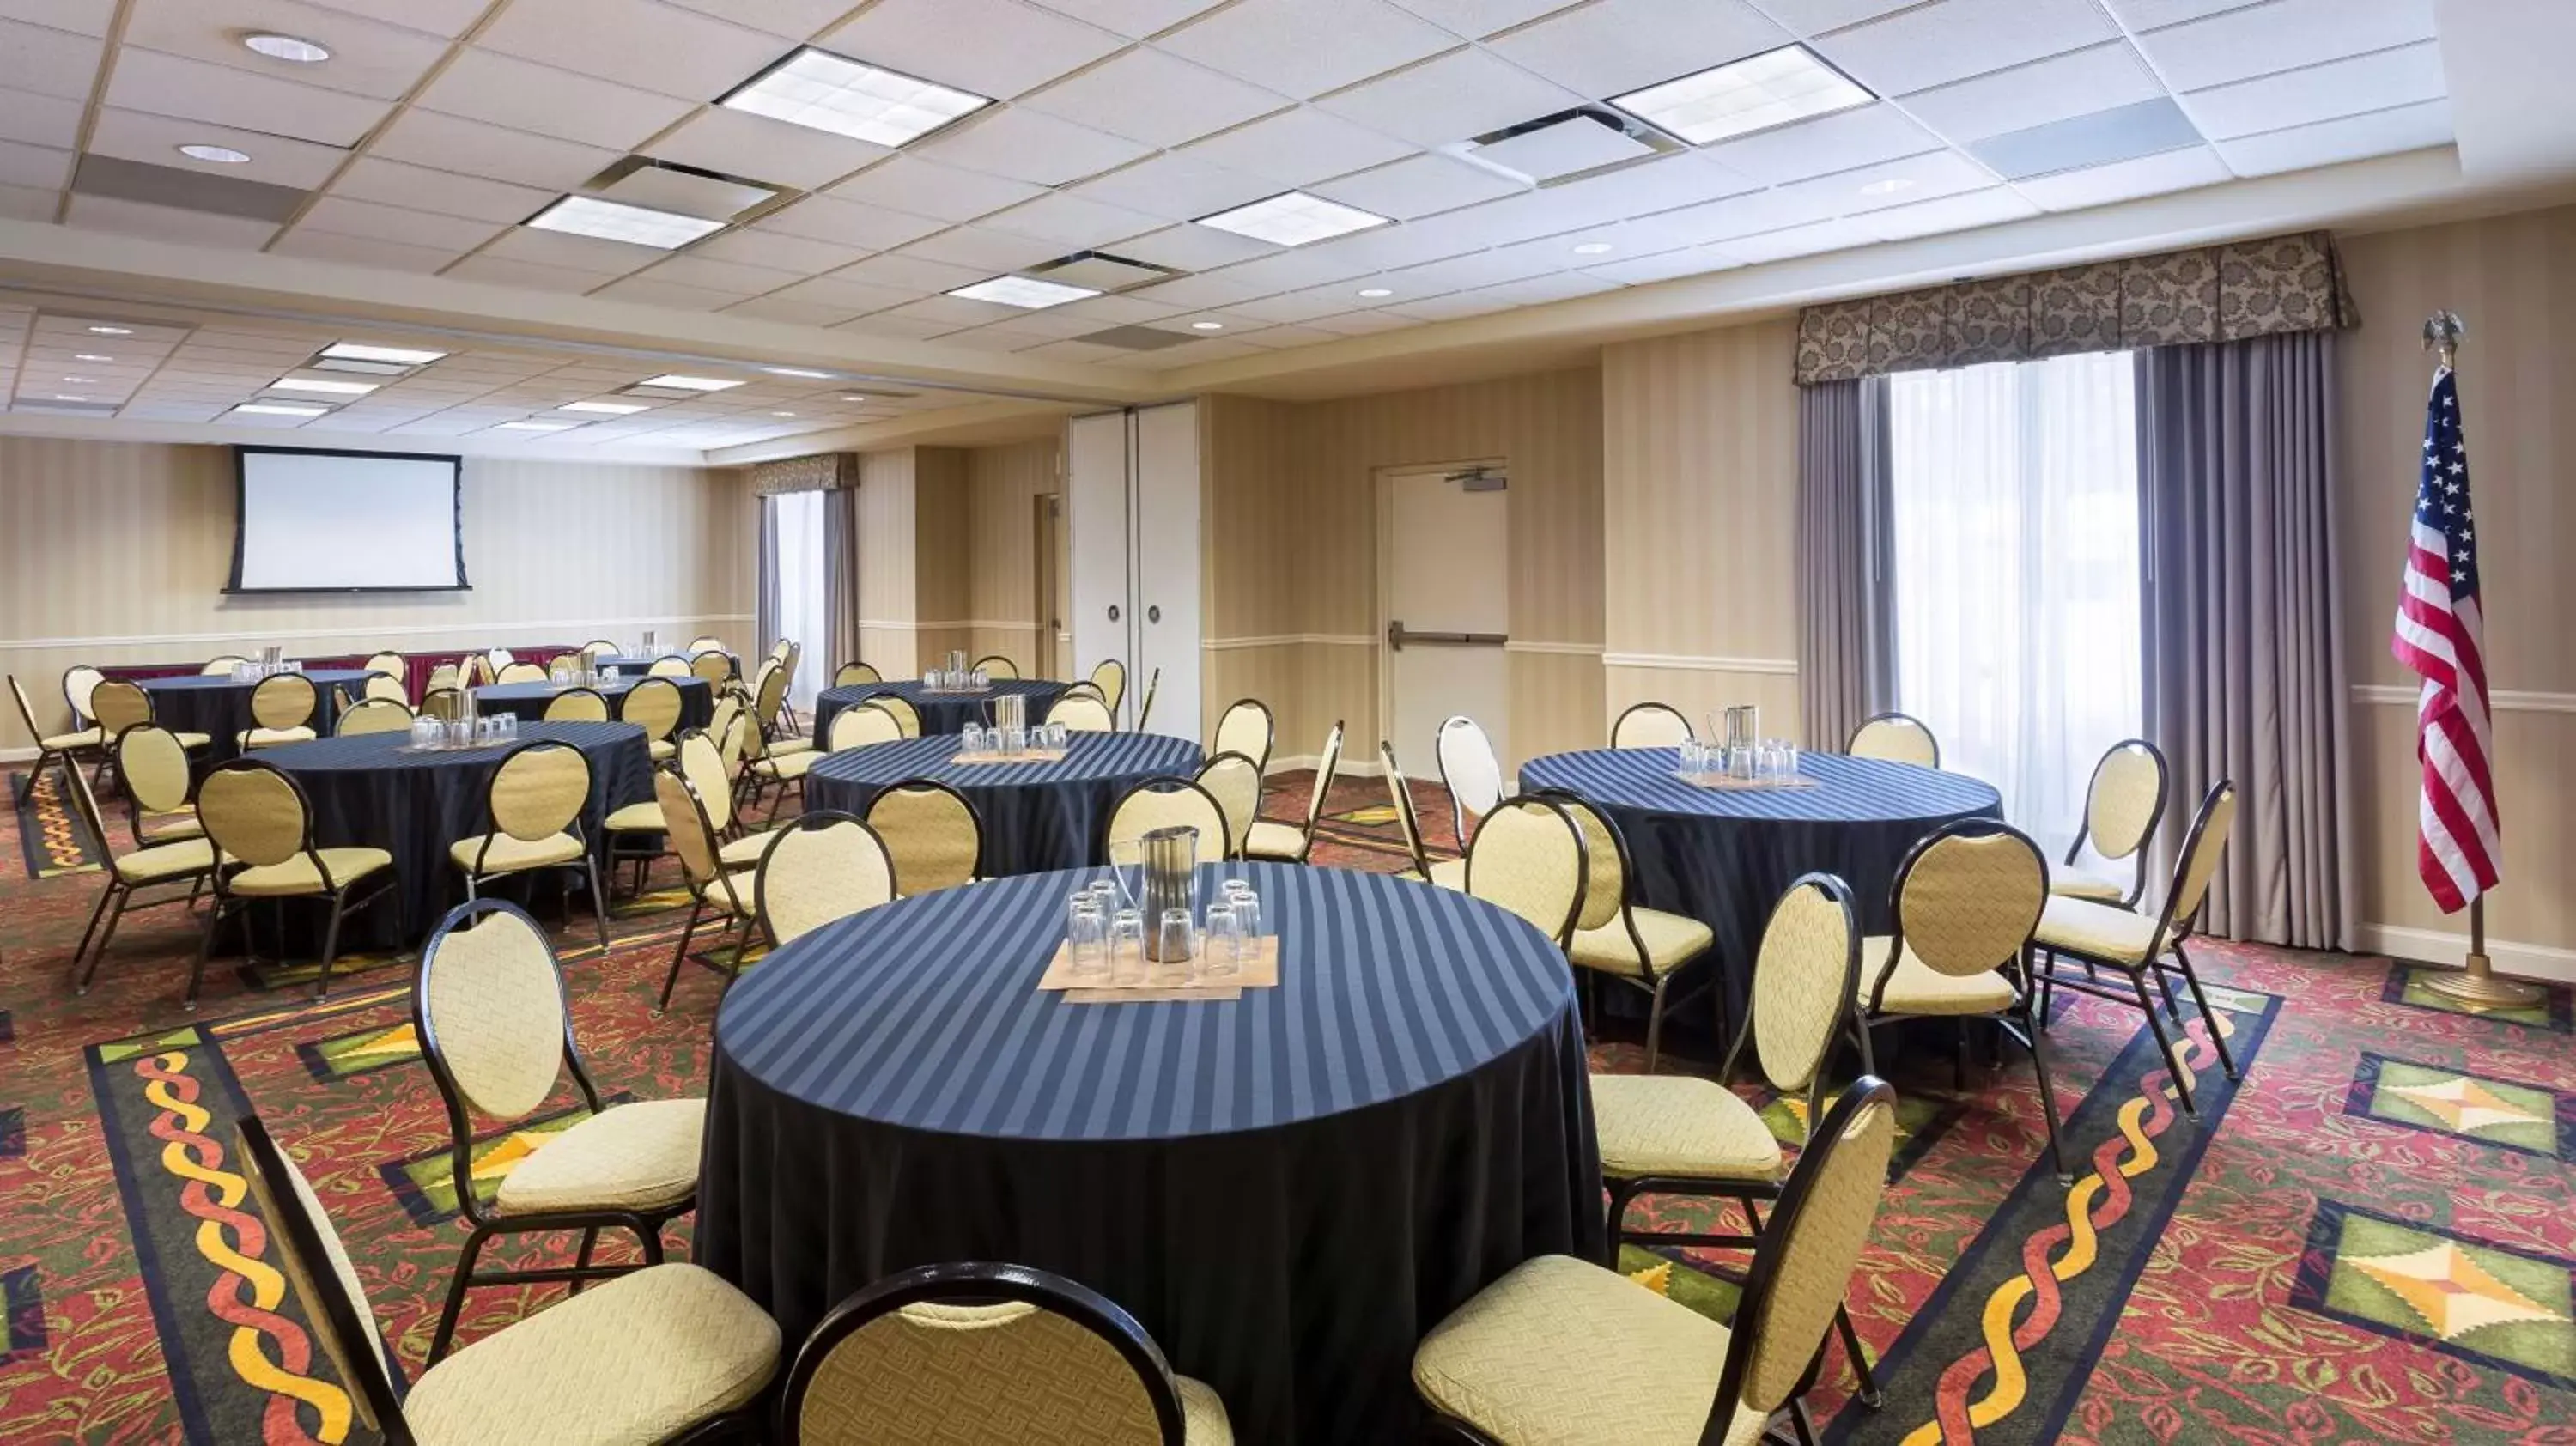 Meeting/conference room, Banquet Facilities in Hilton Garden Inn Saratoga Springs